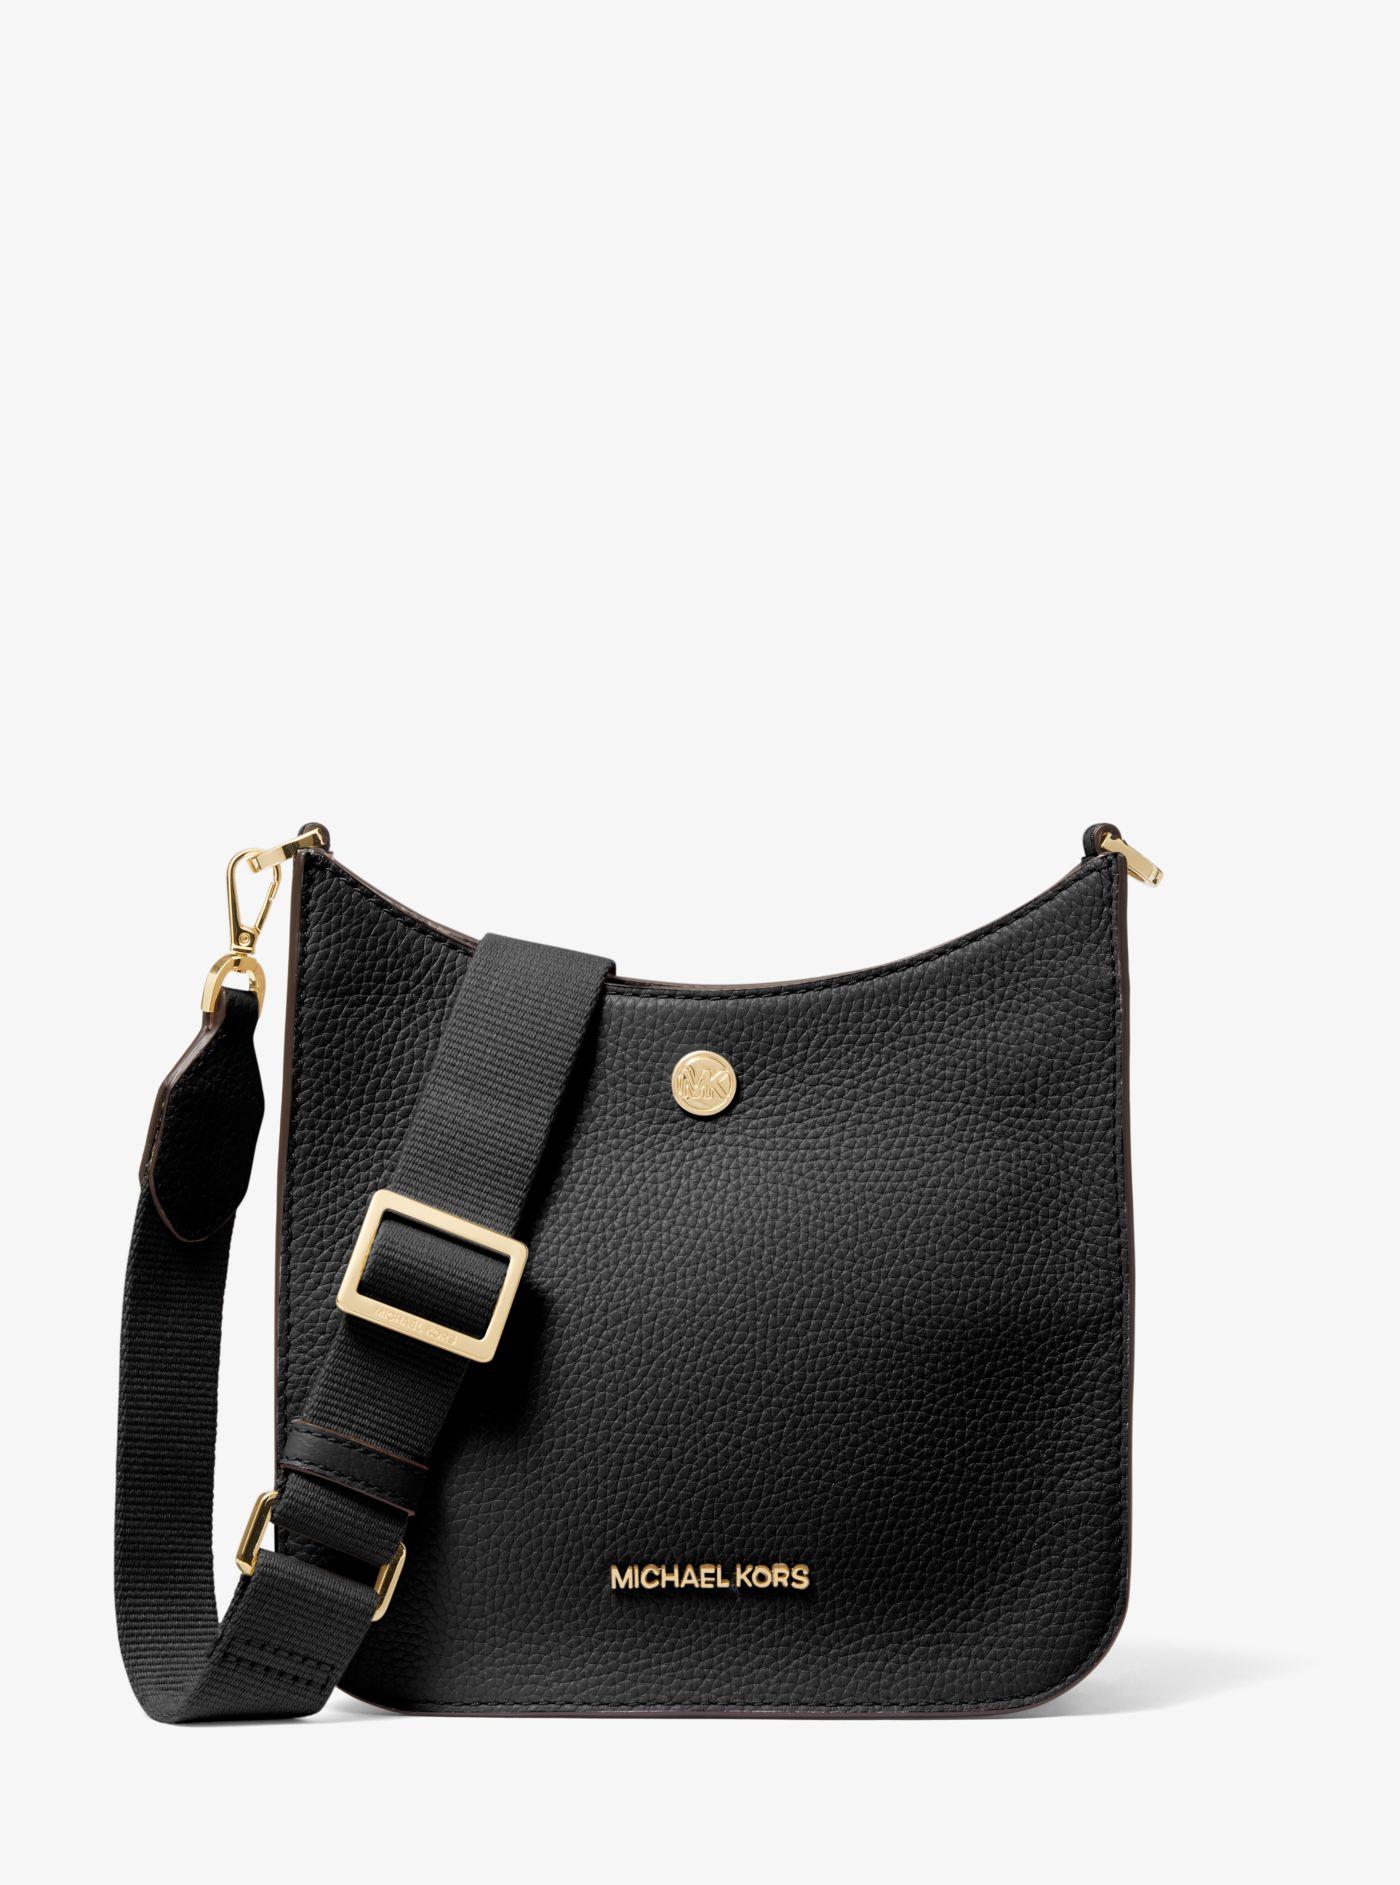 Michael Kors Briley Small Pebbled Leather Messenger Bag in Black | Lyst